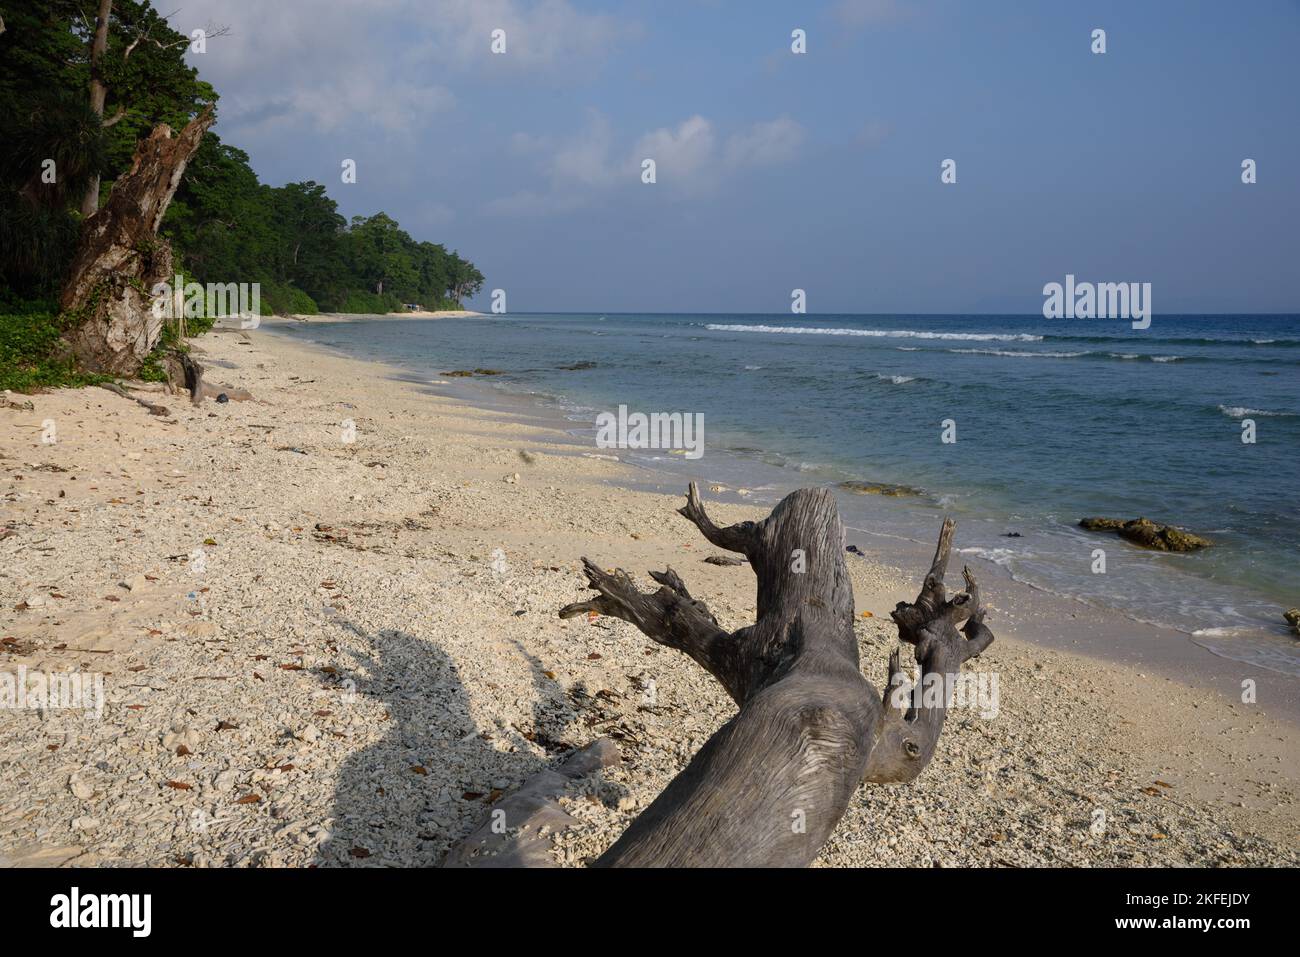 Driftwood, Laxmanpur Beach, Neil Island, Shaheed Dweep, Andaman et Nicobar Islands, Union Territory, UT, Inde Banque D'Images